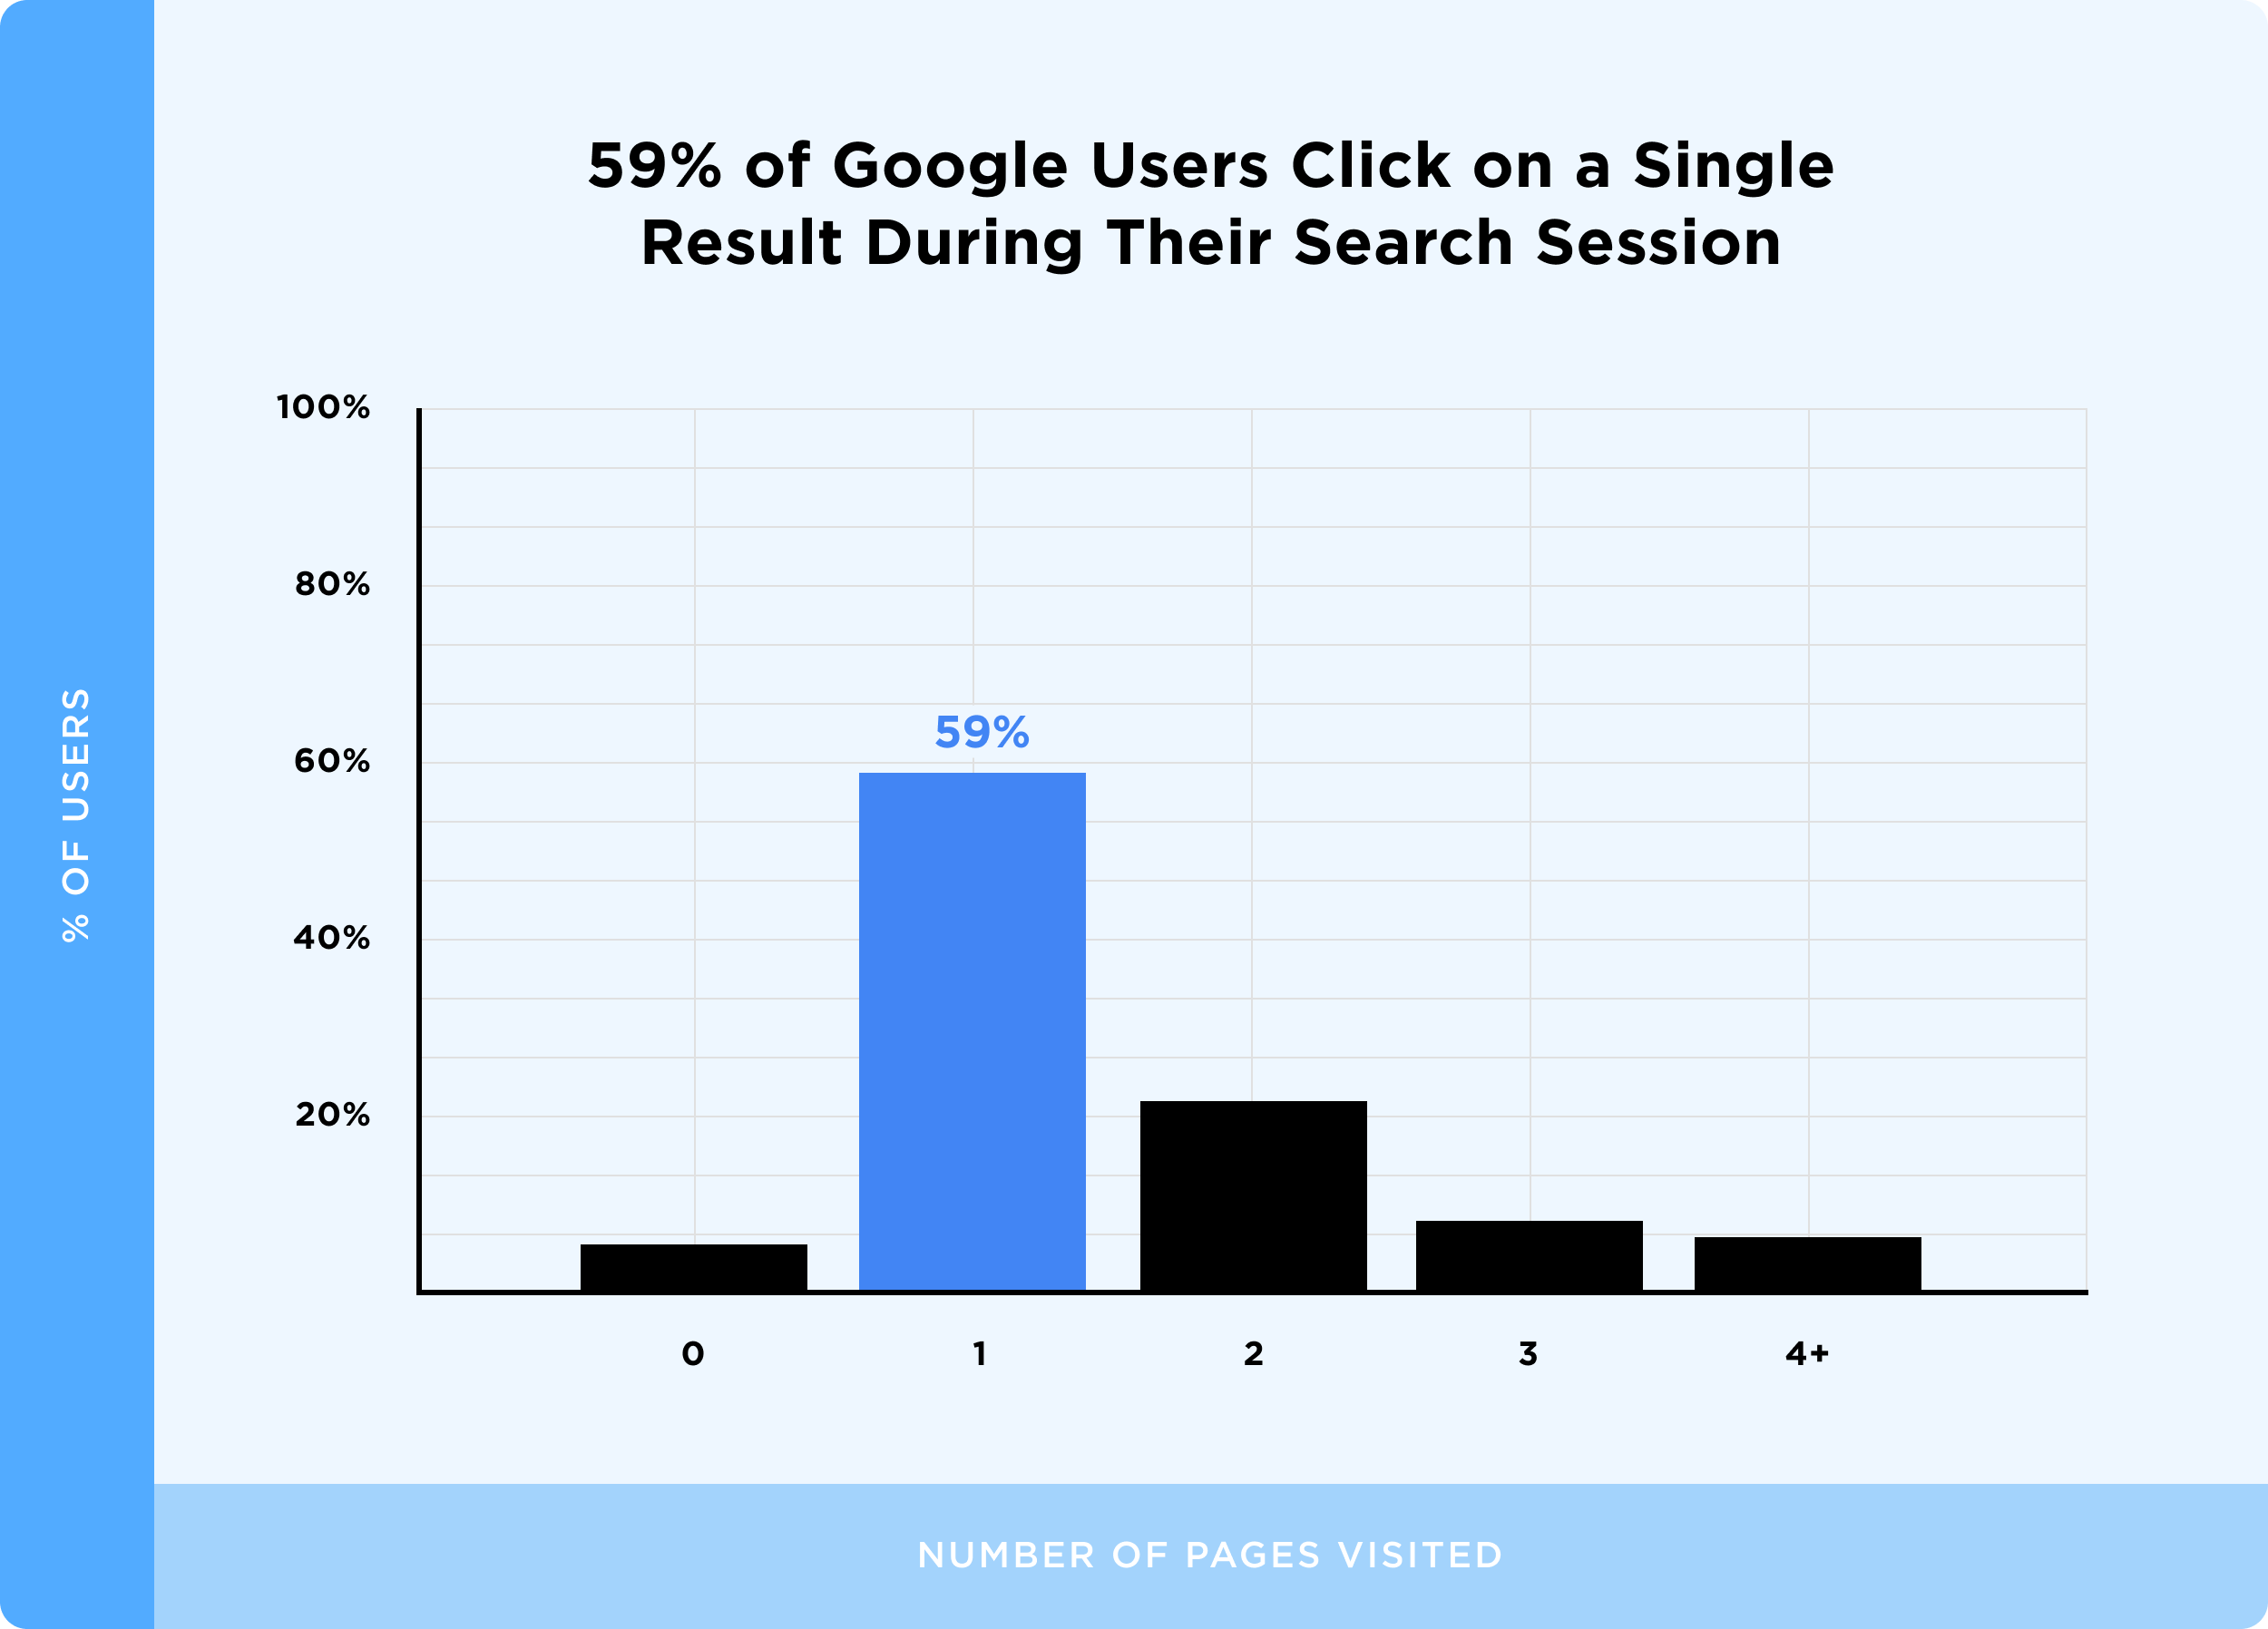 59% of Google Users Click On a Single result During Their Search Session